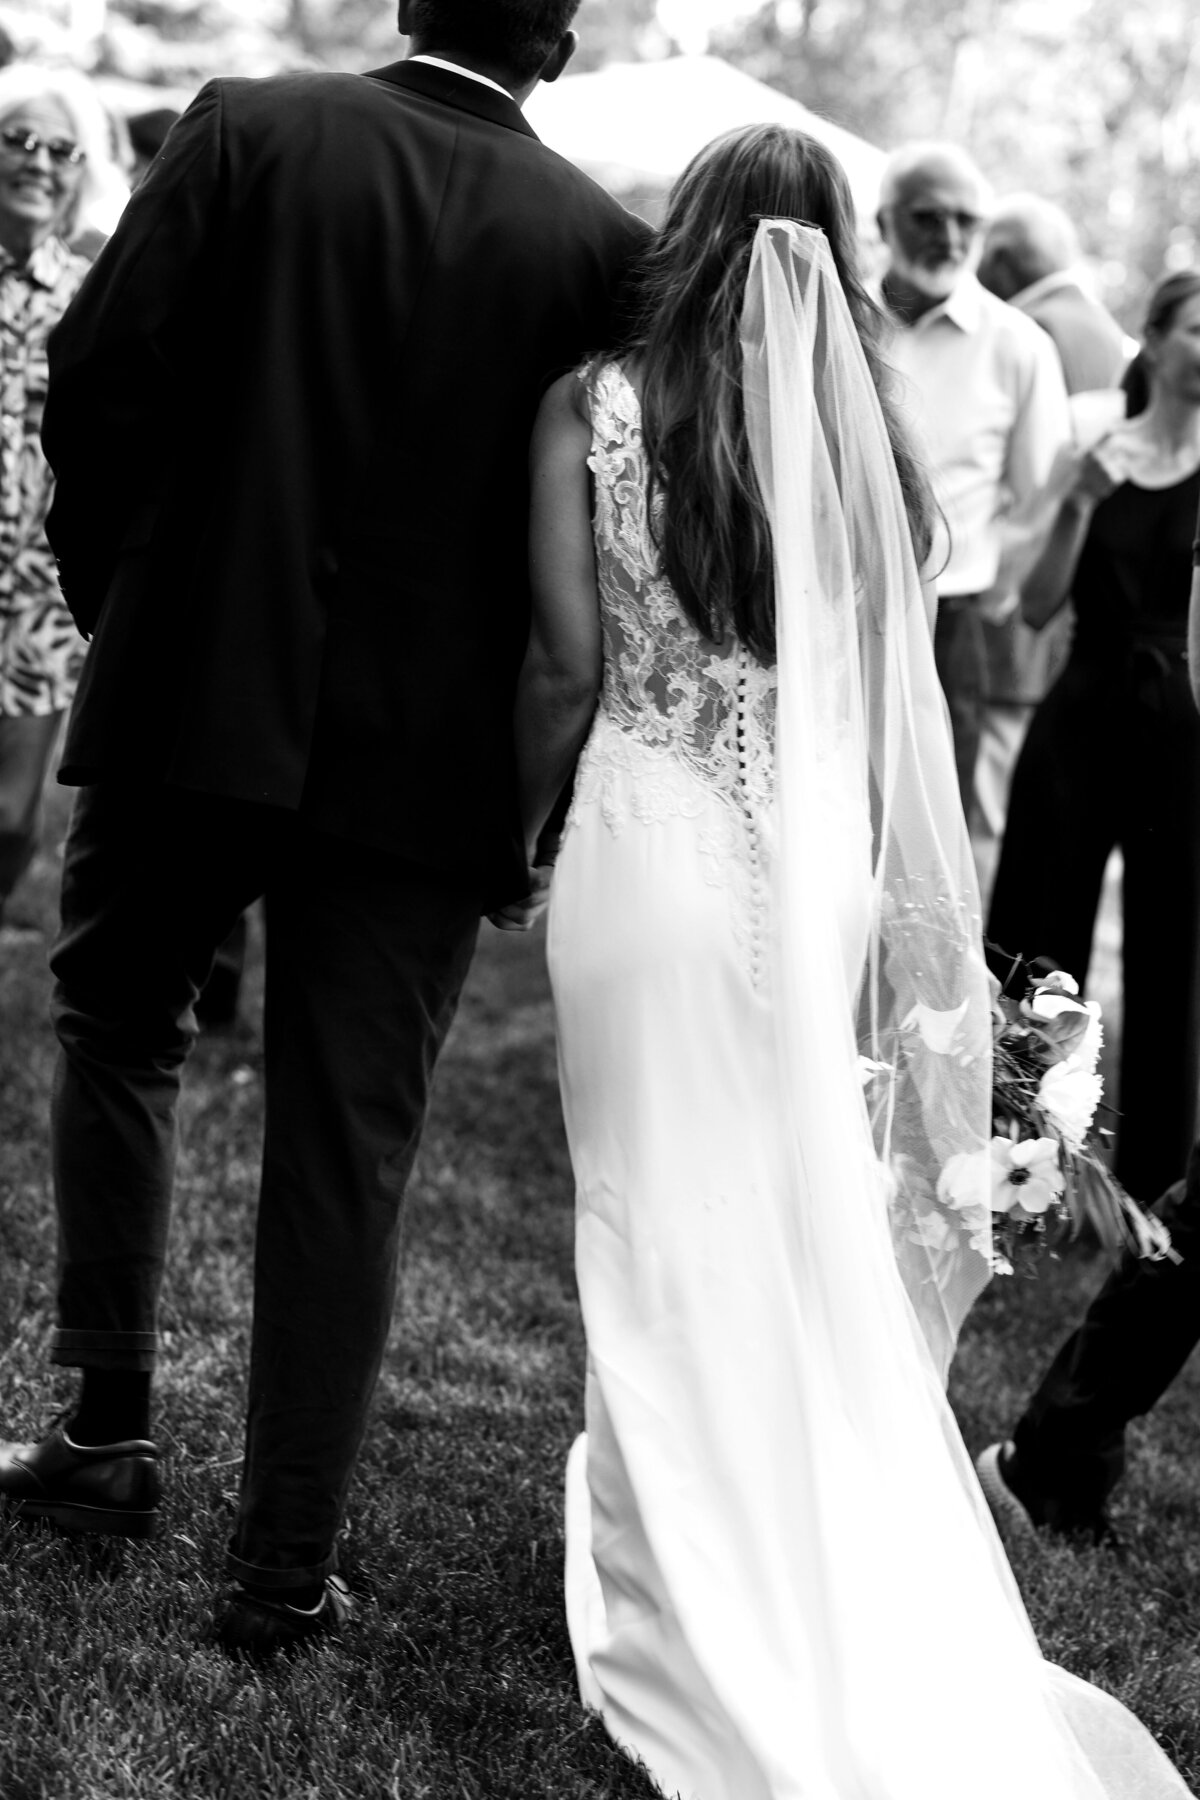 A black and white portrait of a bride and groom walking towards their guests, with a view of the brides white dress from the back with lace and buttons.